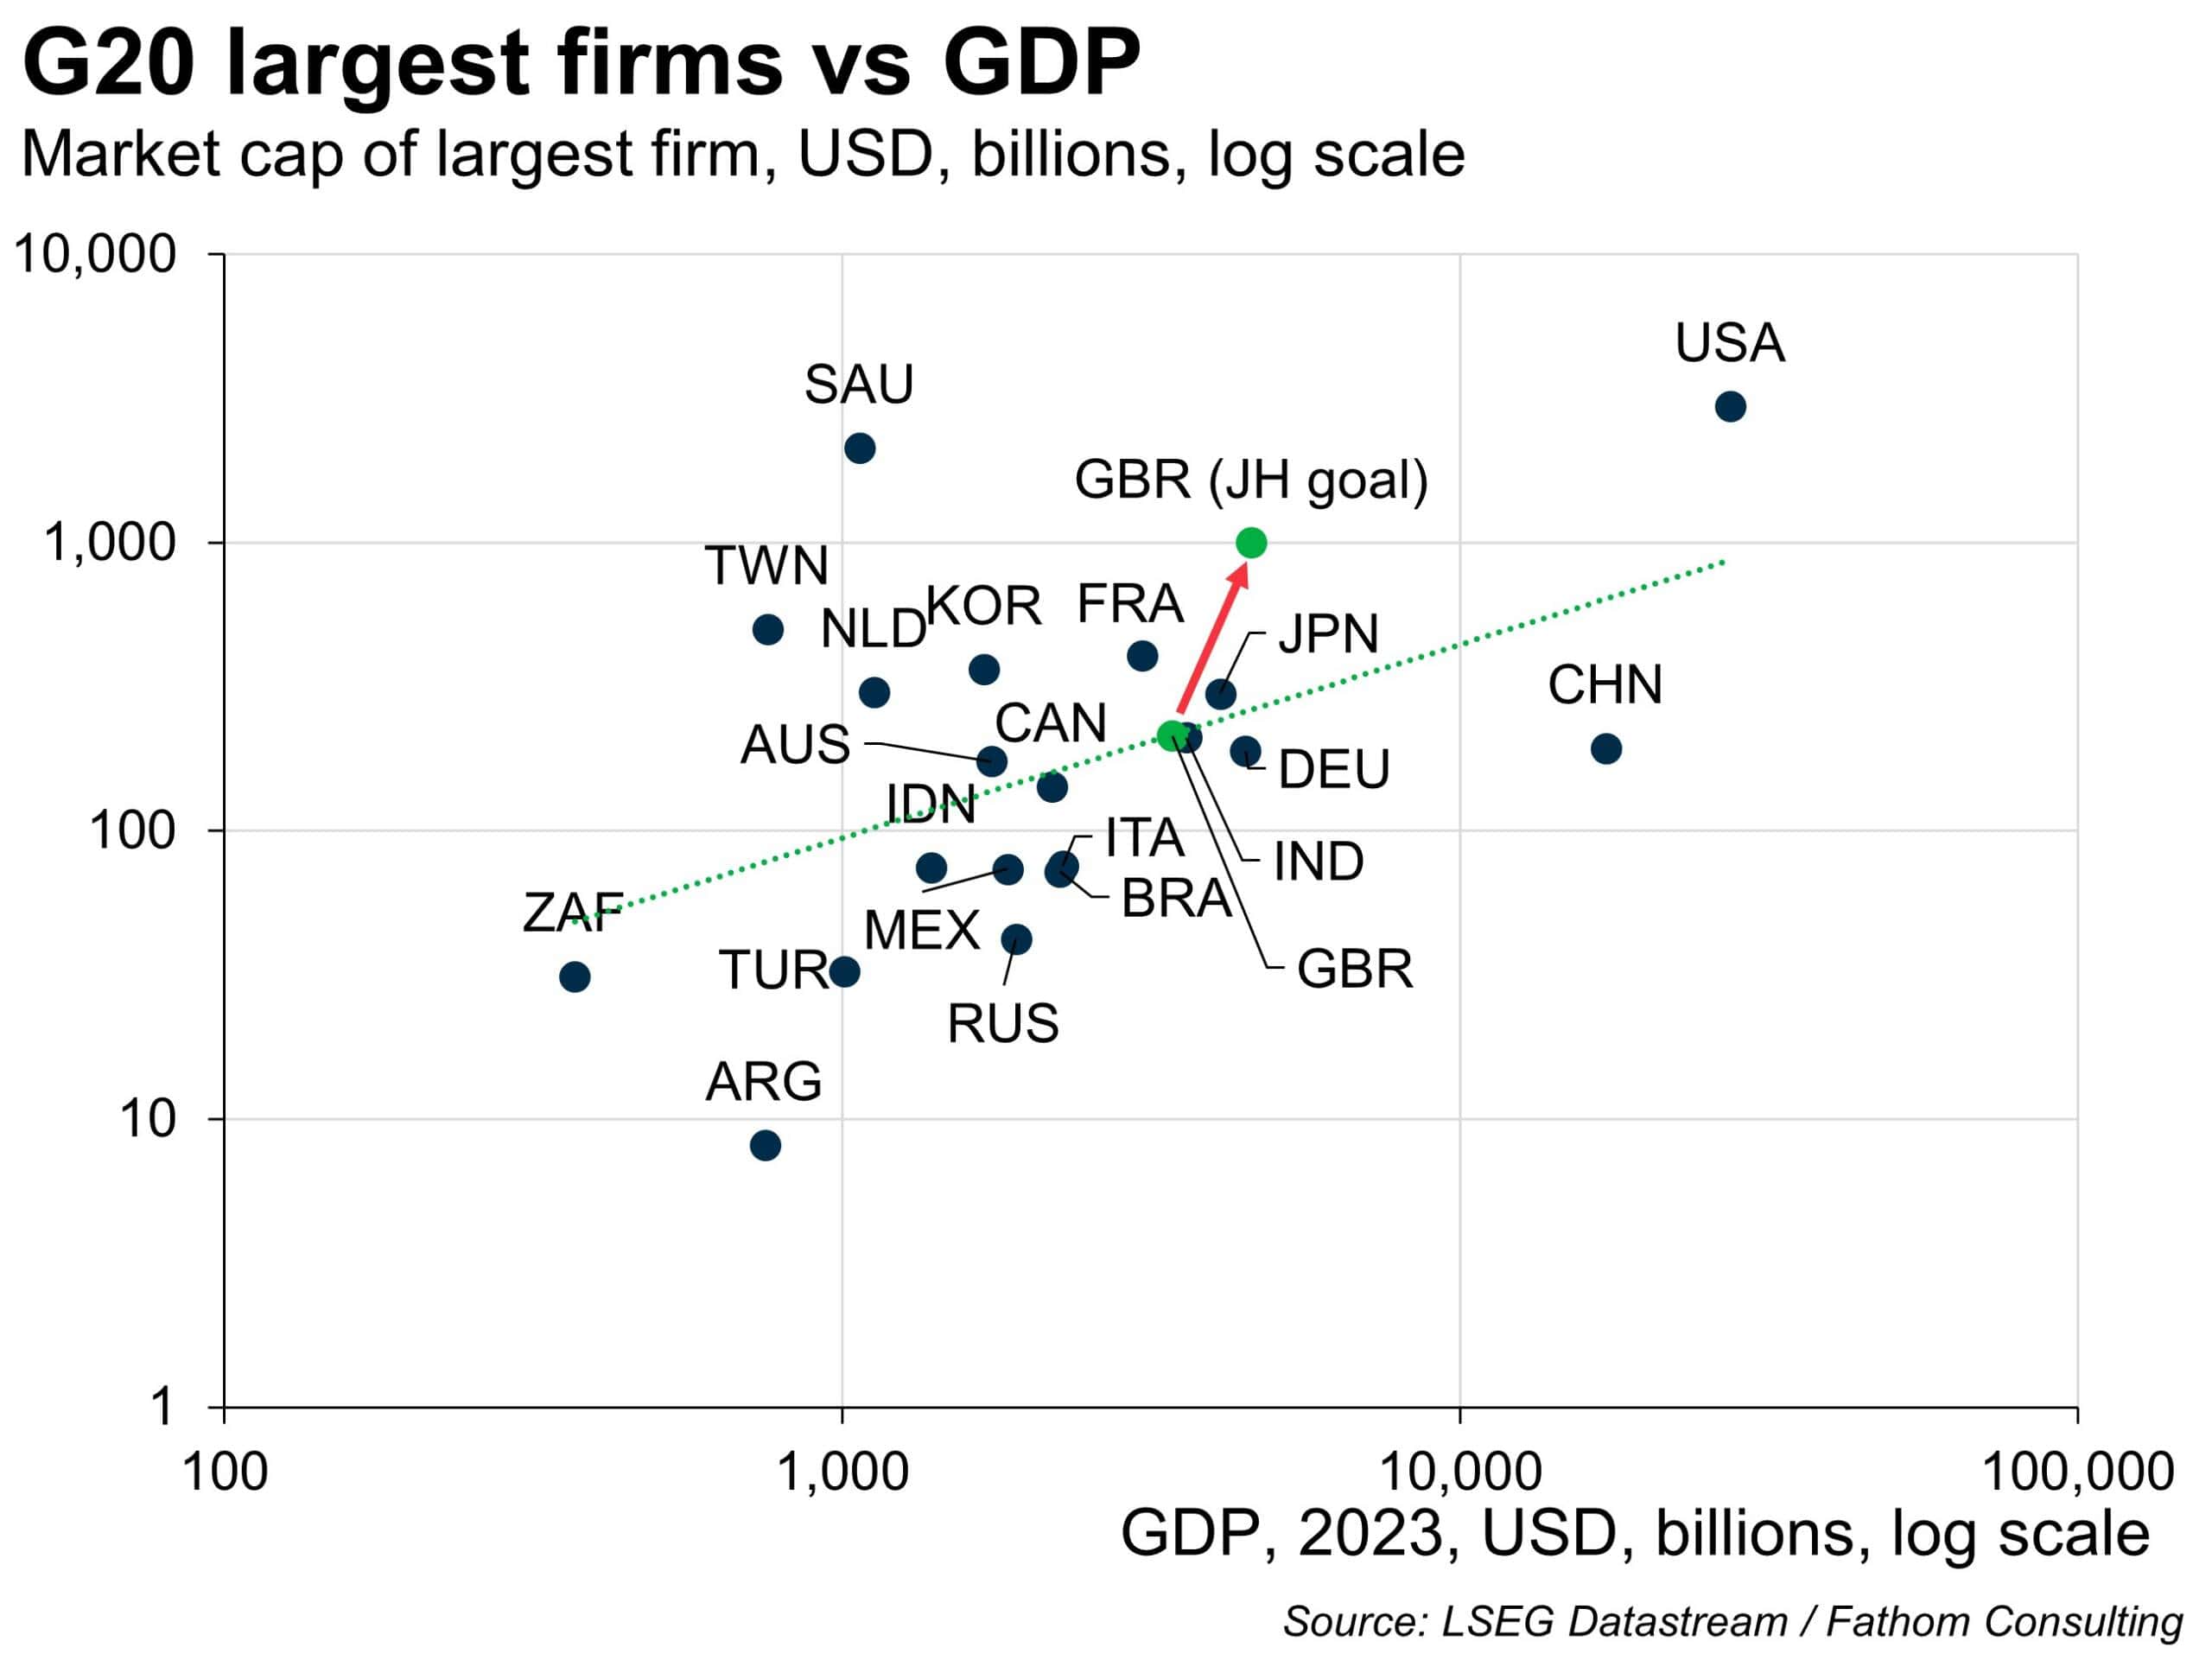 G20 largest firms versus GDP, by market cap of largest firm, in USD, billions, on a log scale as a scatter map